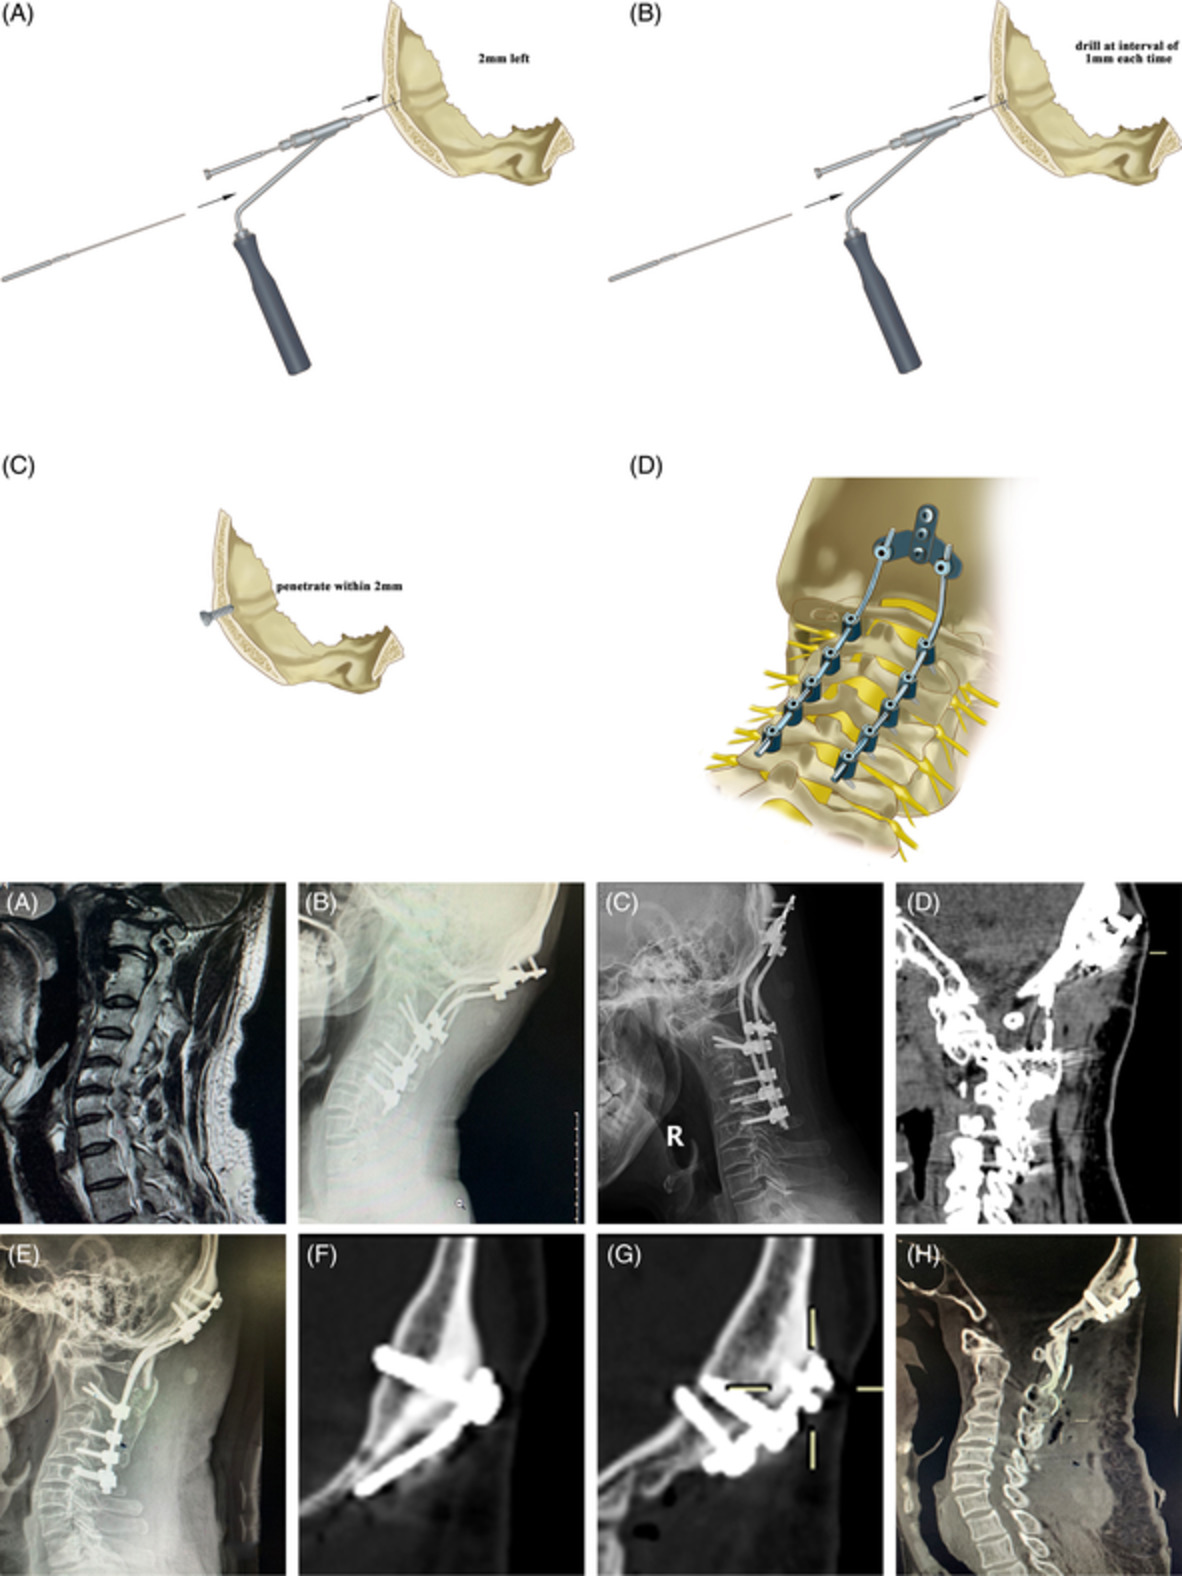 Occipitocervical Revision Surgery Using the Bicortical Screw and Plate System for Failed Craniovertebral Junction Stabilization